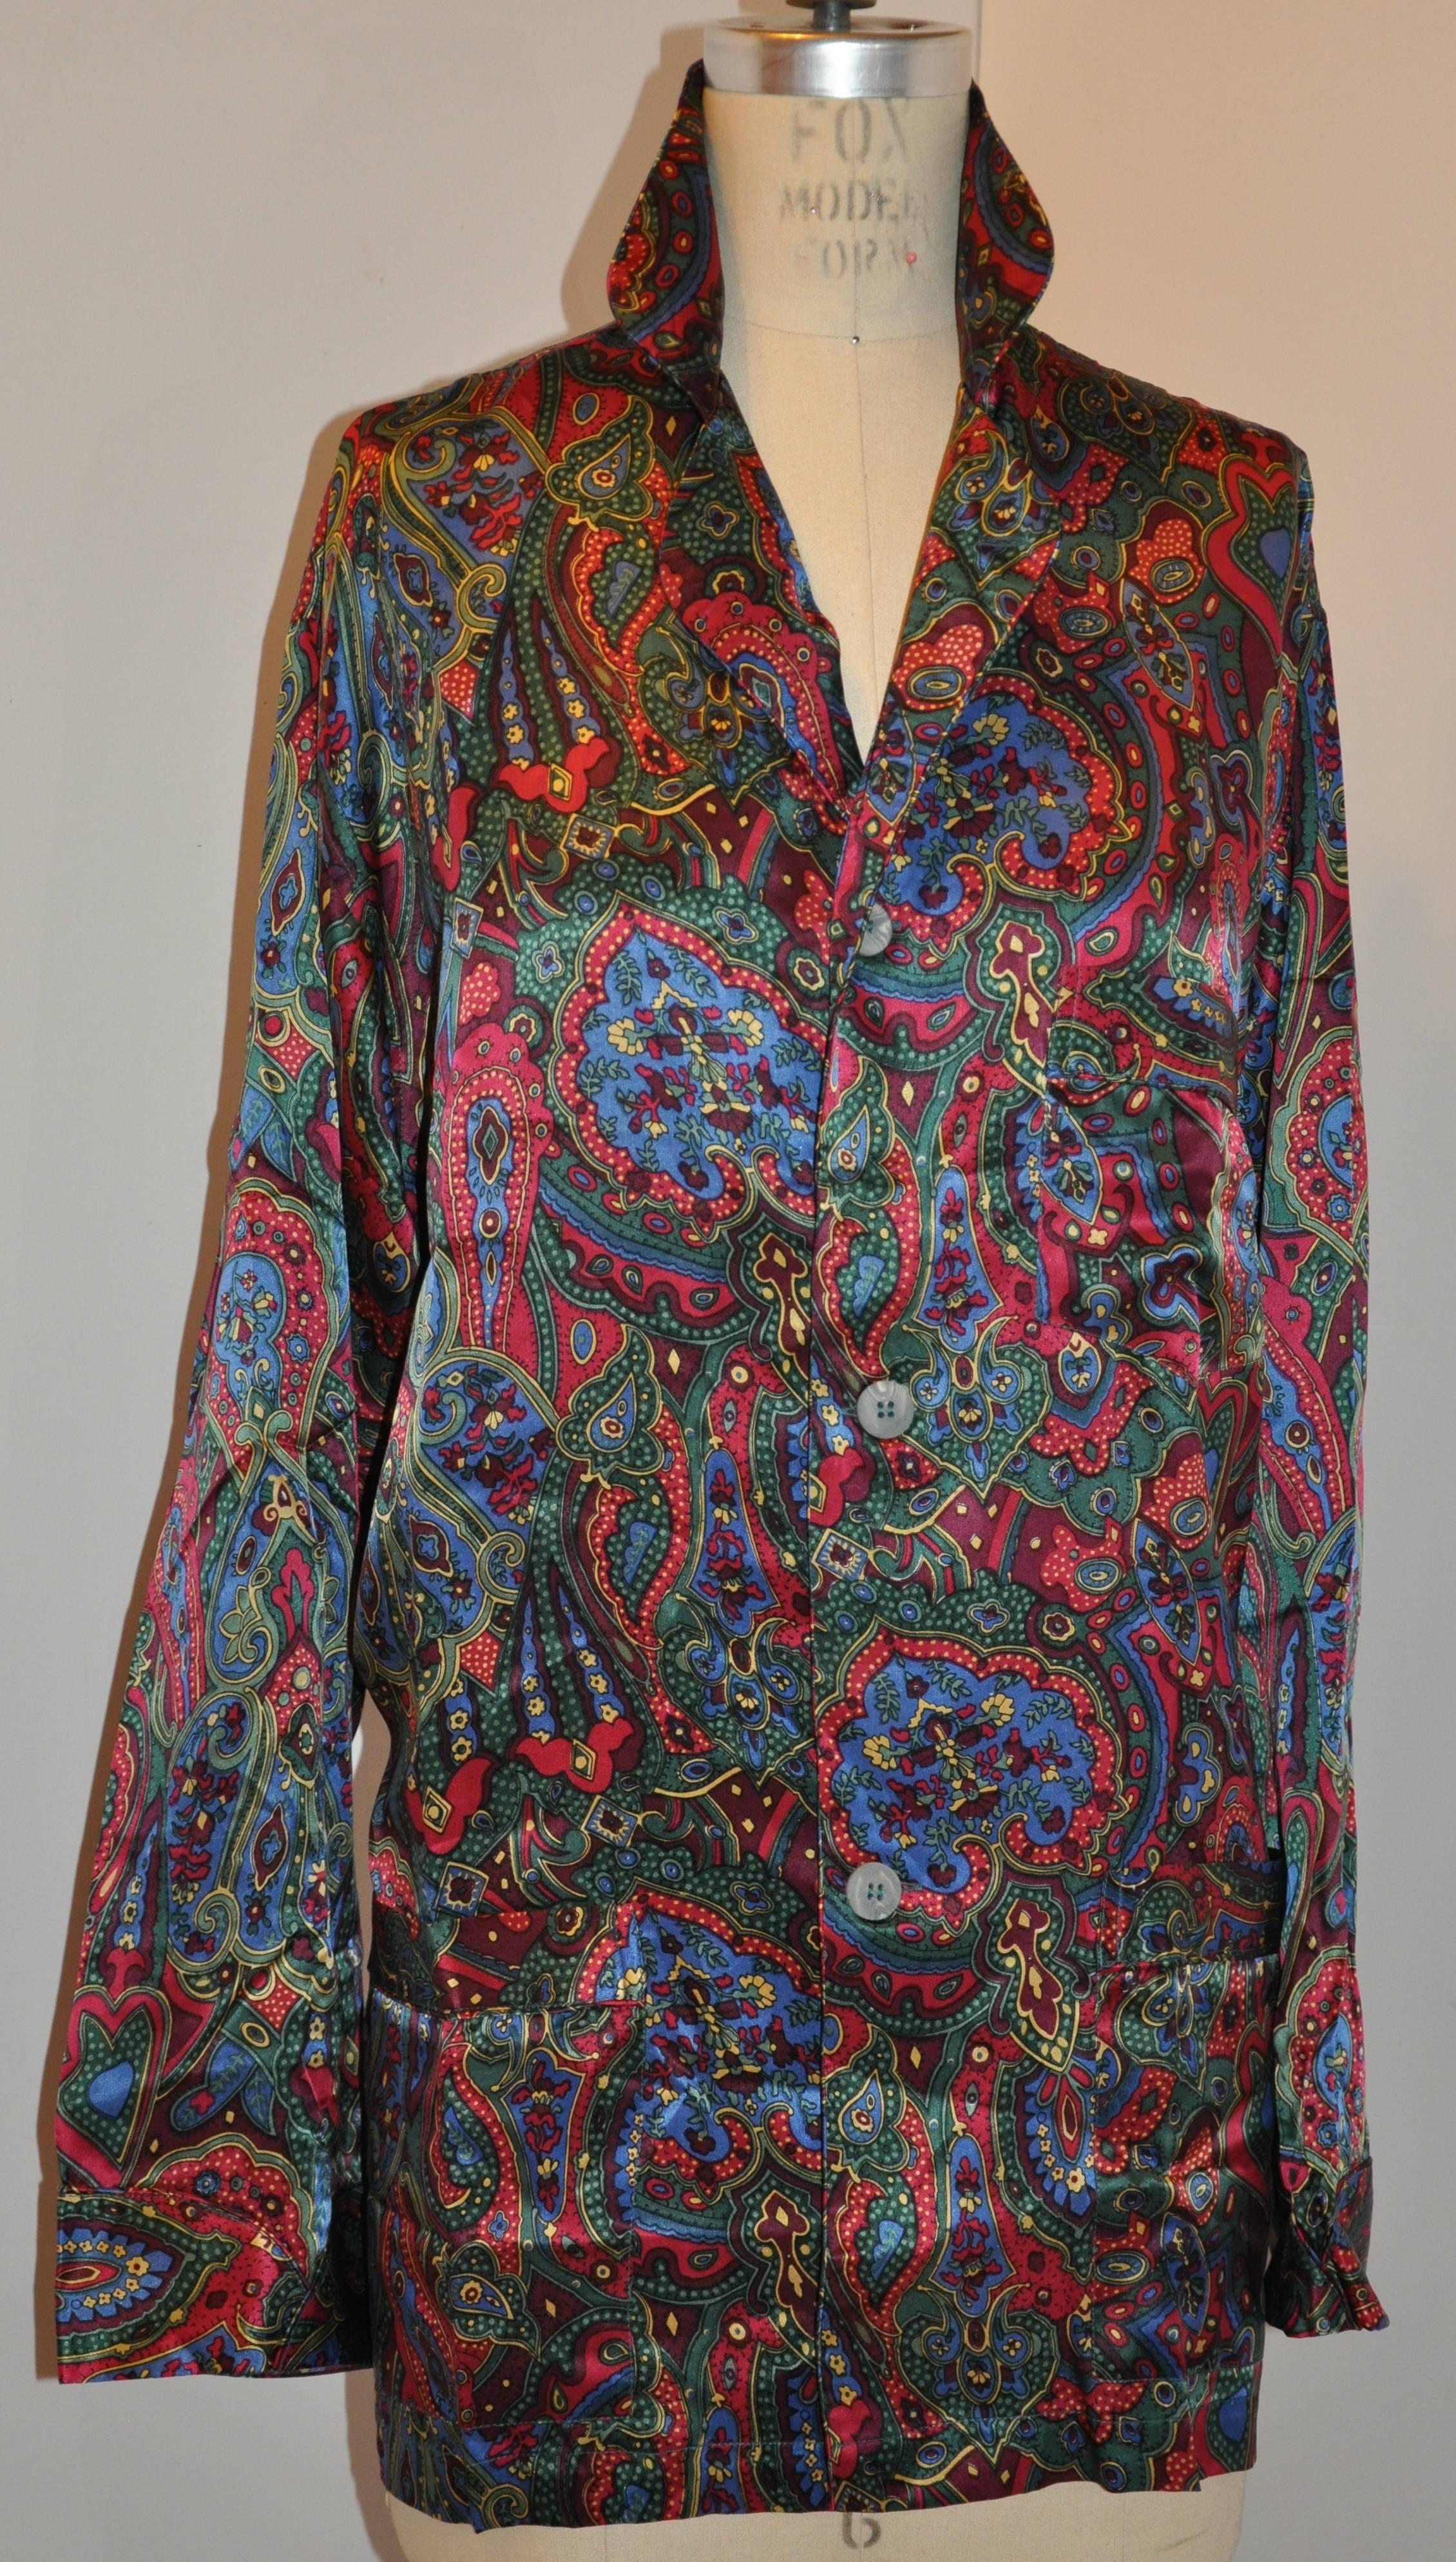       Christian Dior wonderful men's two-piece silk palsey-print silk pajamas consists of a 3-button top, with two patch pockets in front. The underarm circumference measures 48 inches, neck-to-shoulder is 7 1/2 inches, hem circumference is 48